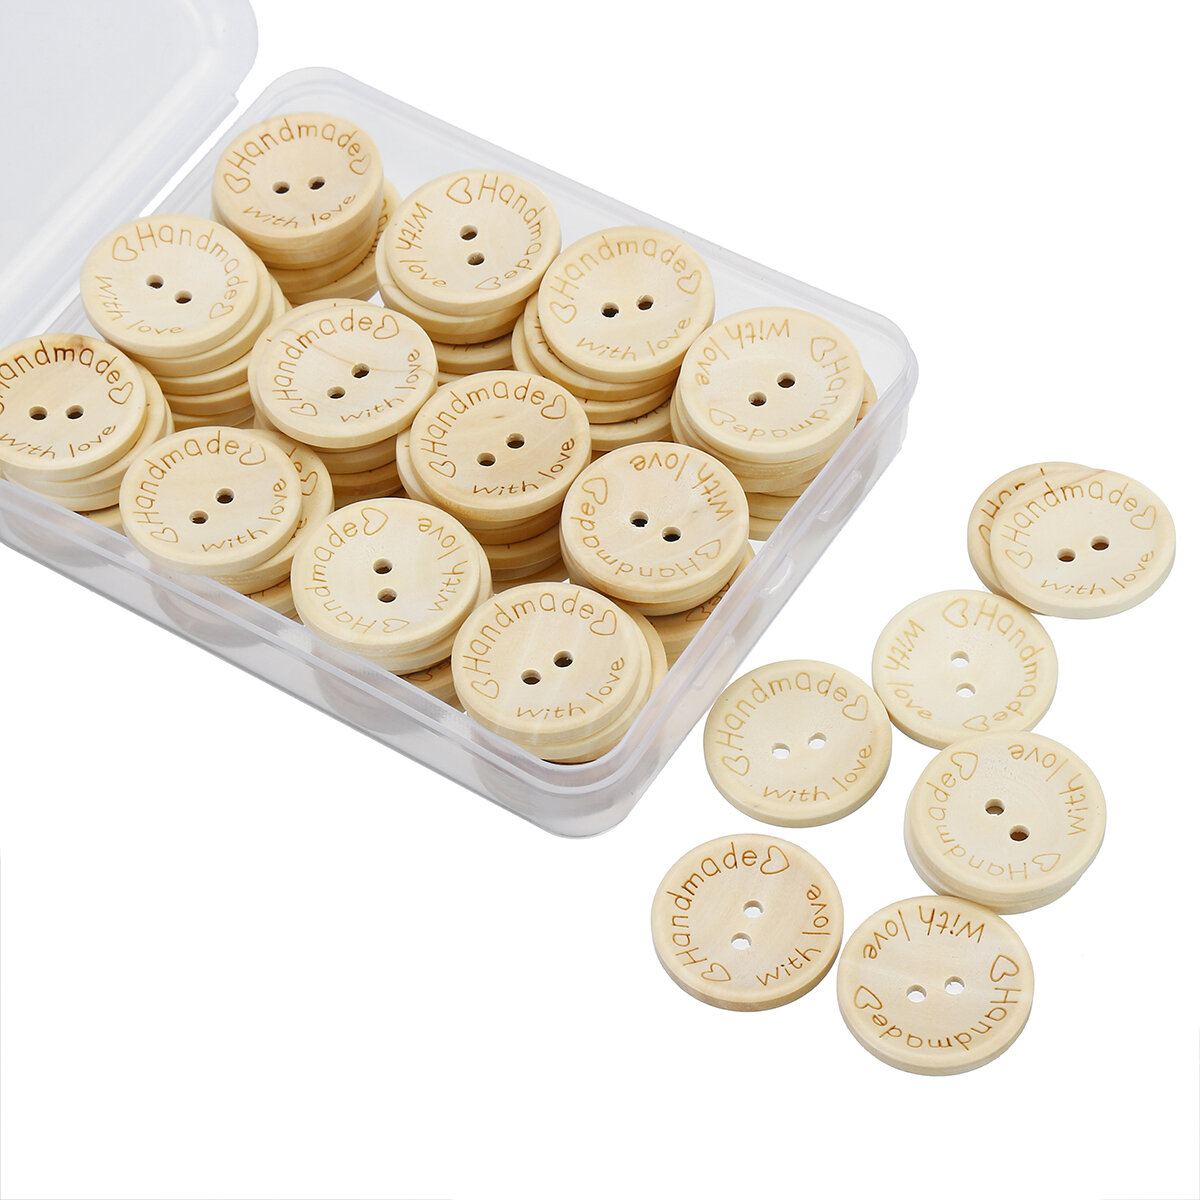 80Pcs Buttons Set 25mm Round Two Holes DIY Button Clothes Making Repairing Accessories For Children